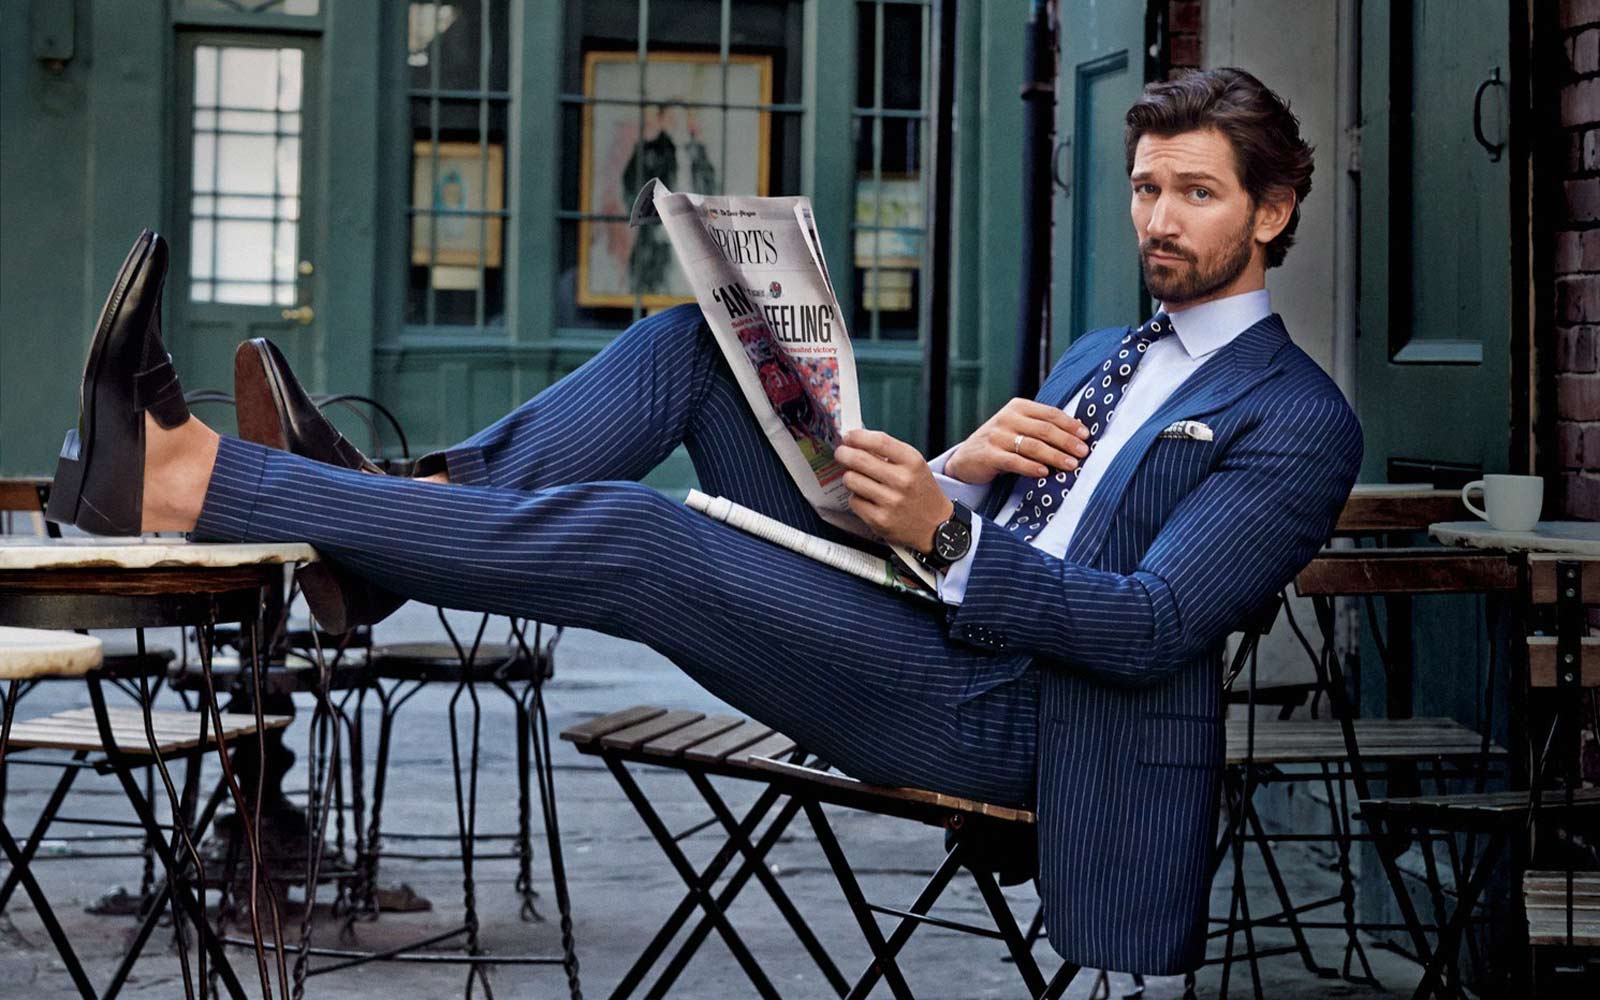 Man reading the newspaper wearing a blue suit